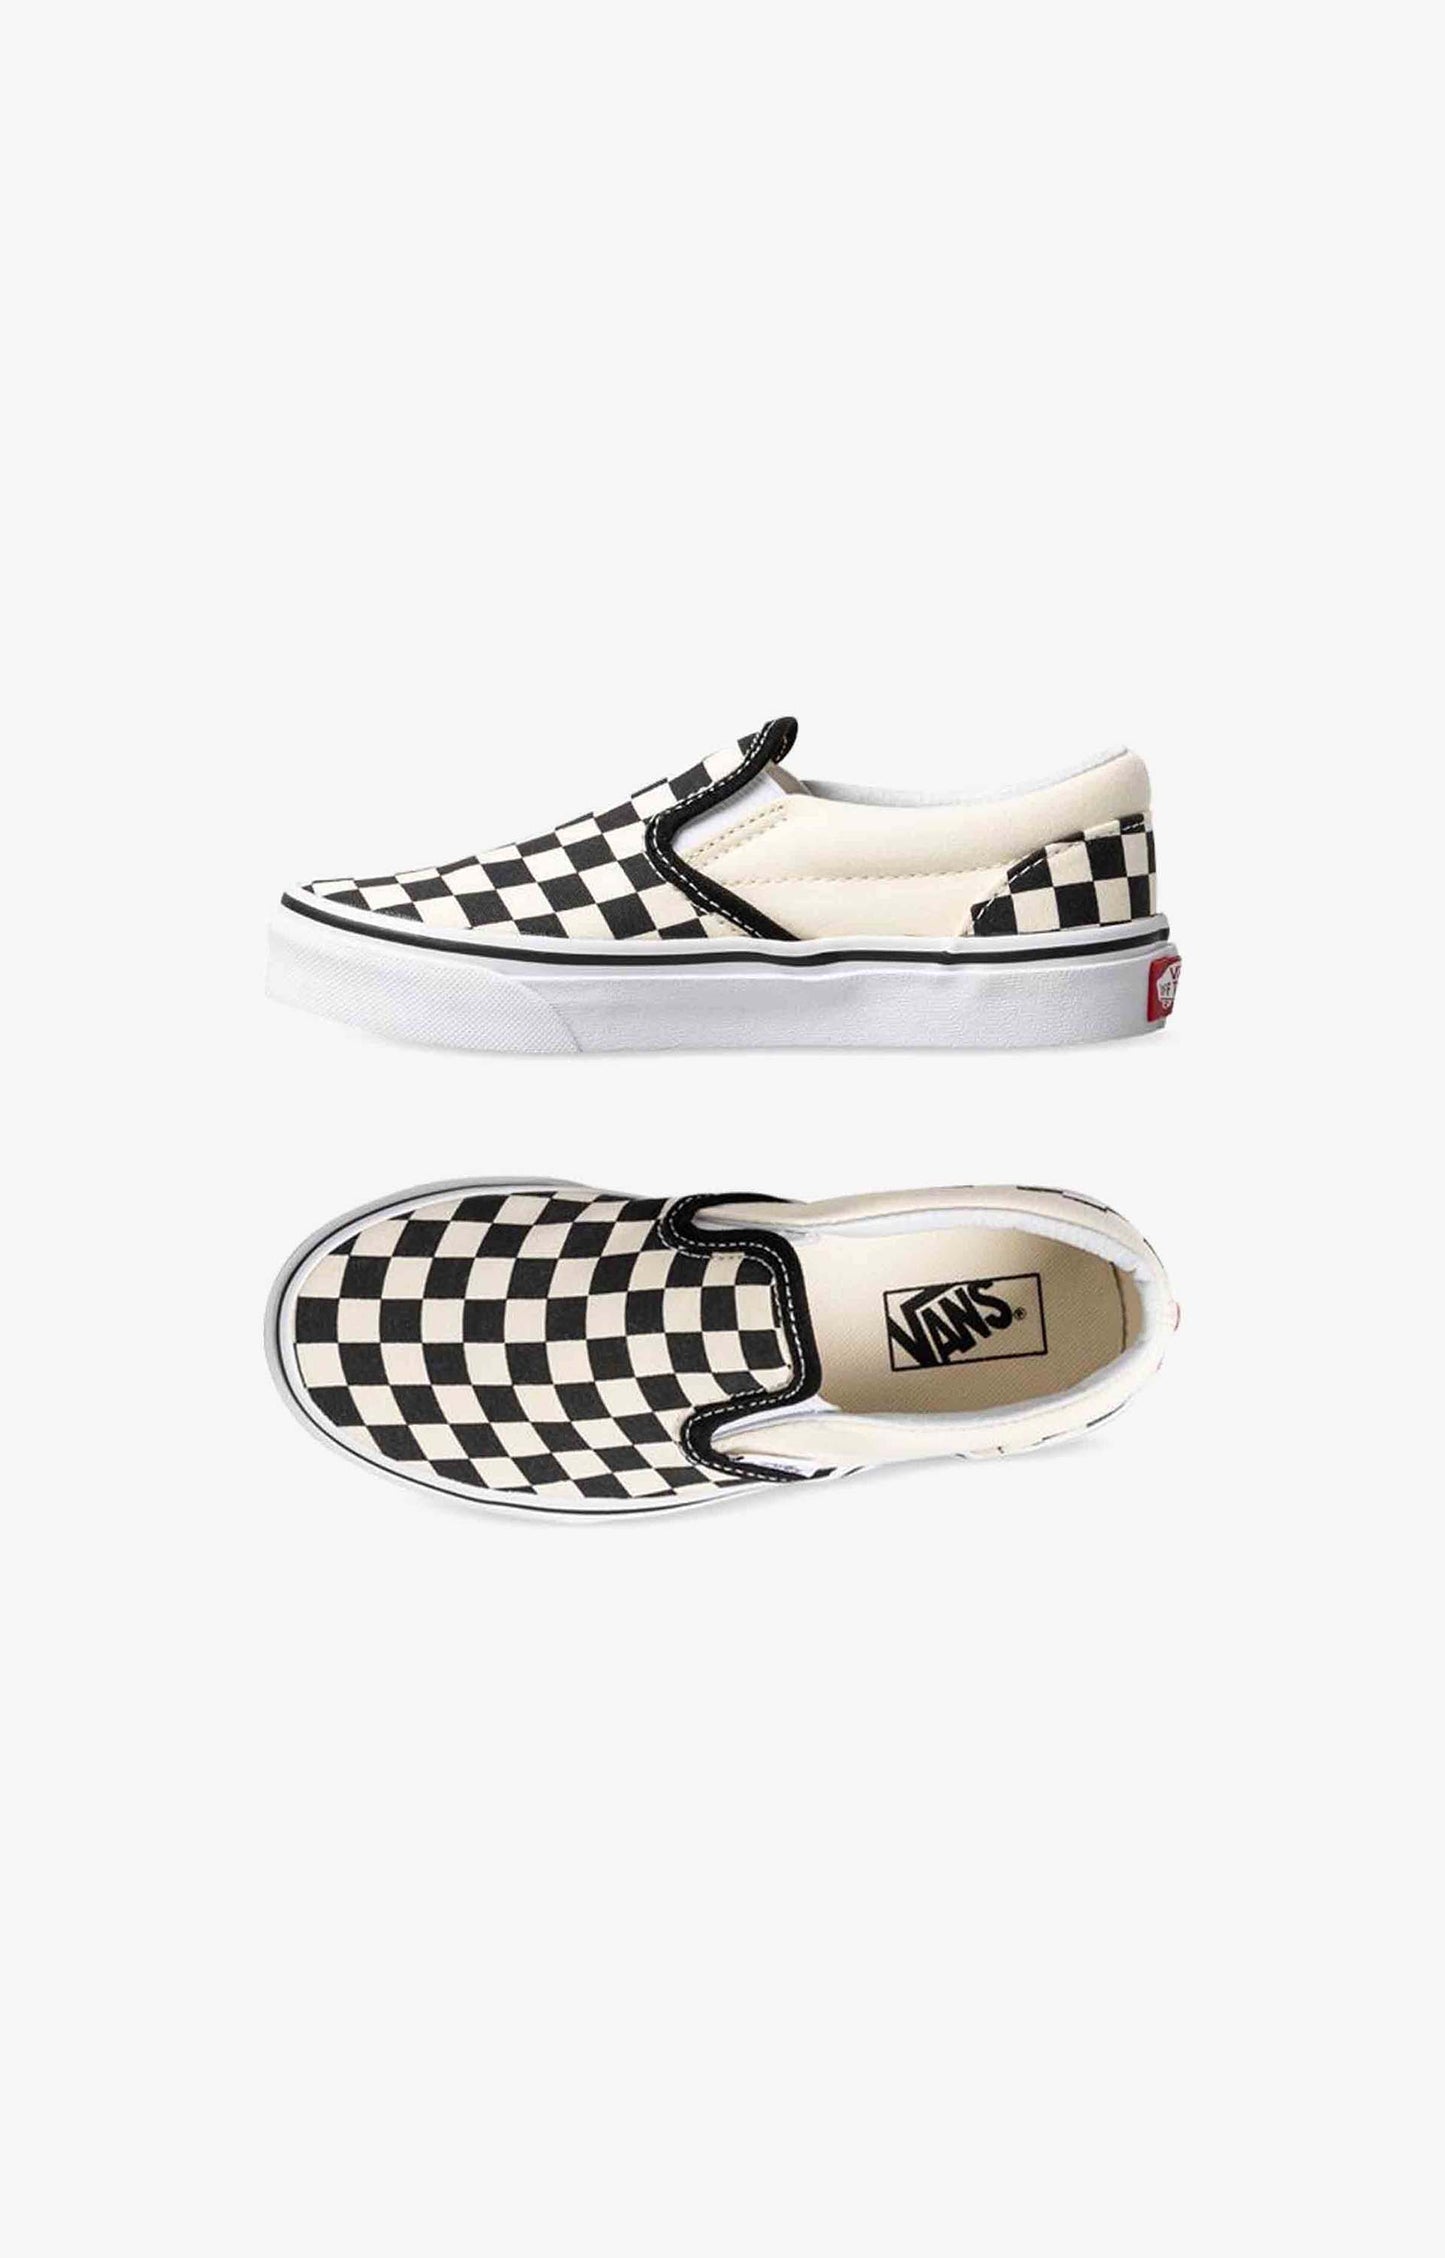 Vans Kids Classic Slip-On Shoes, Checkerboard